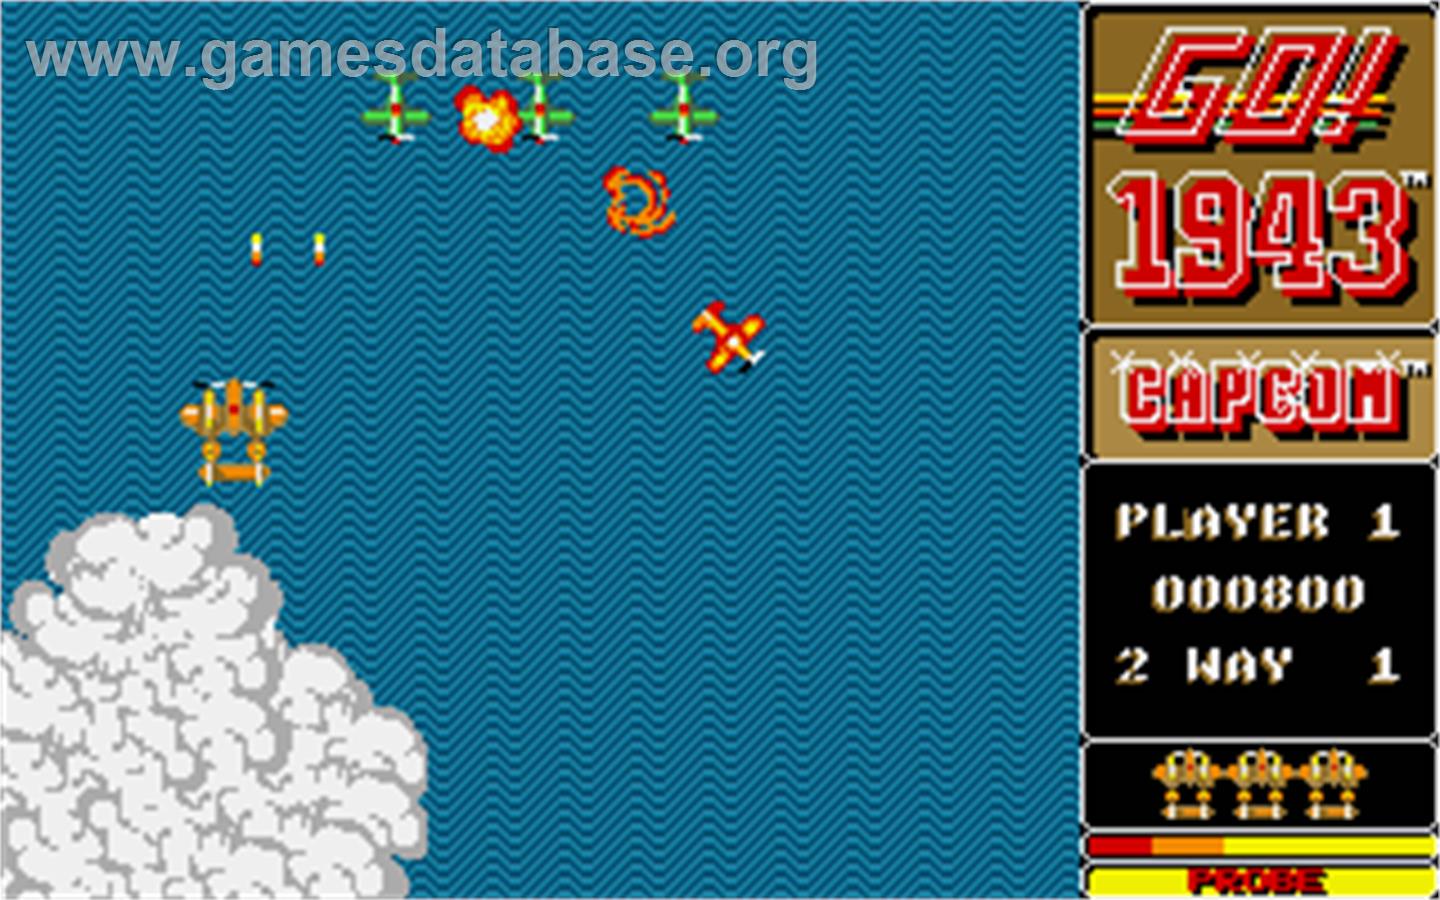 1943: The Battle of Midway - Atari ST - Artwork - In Game